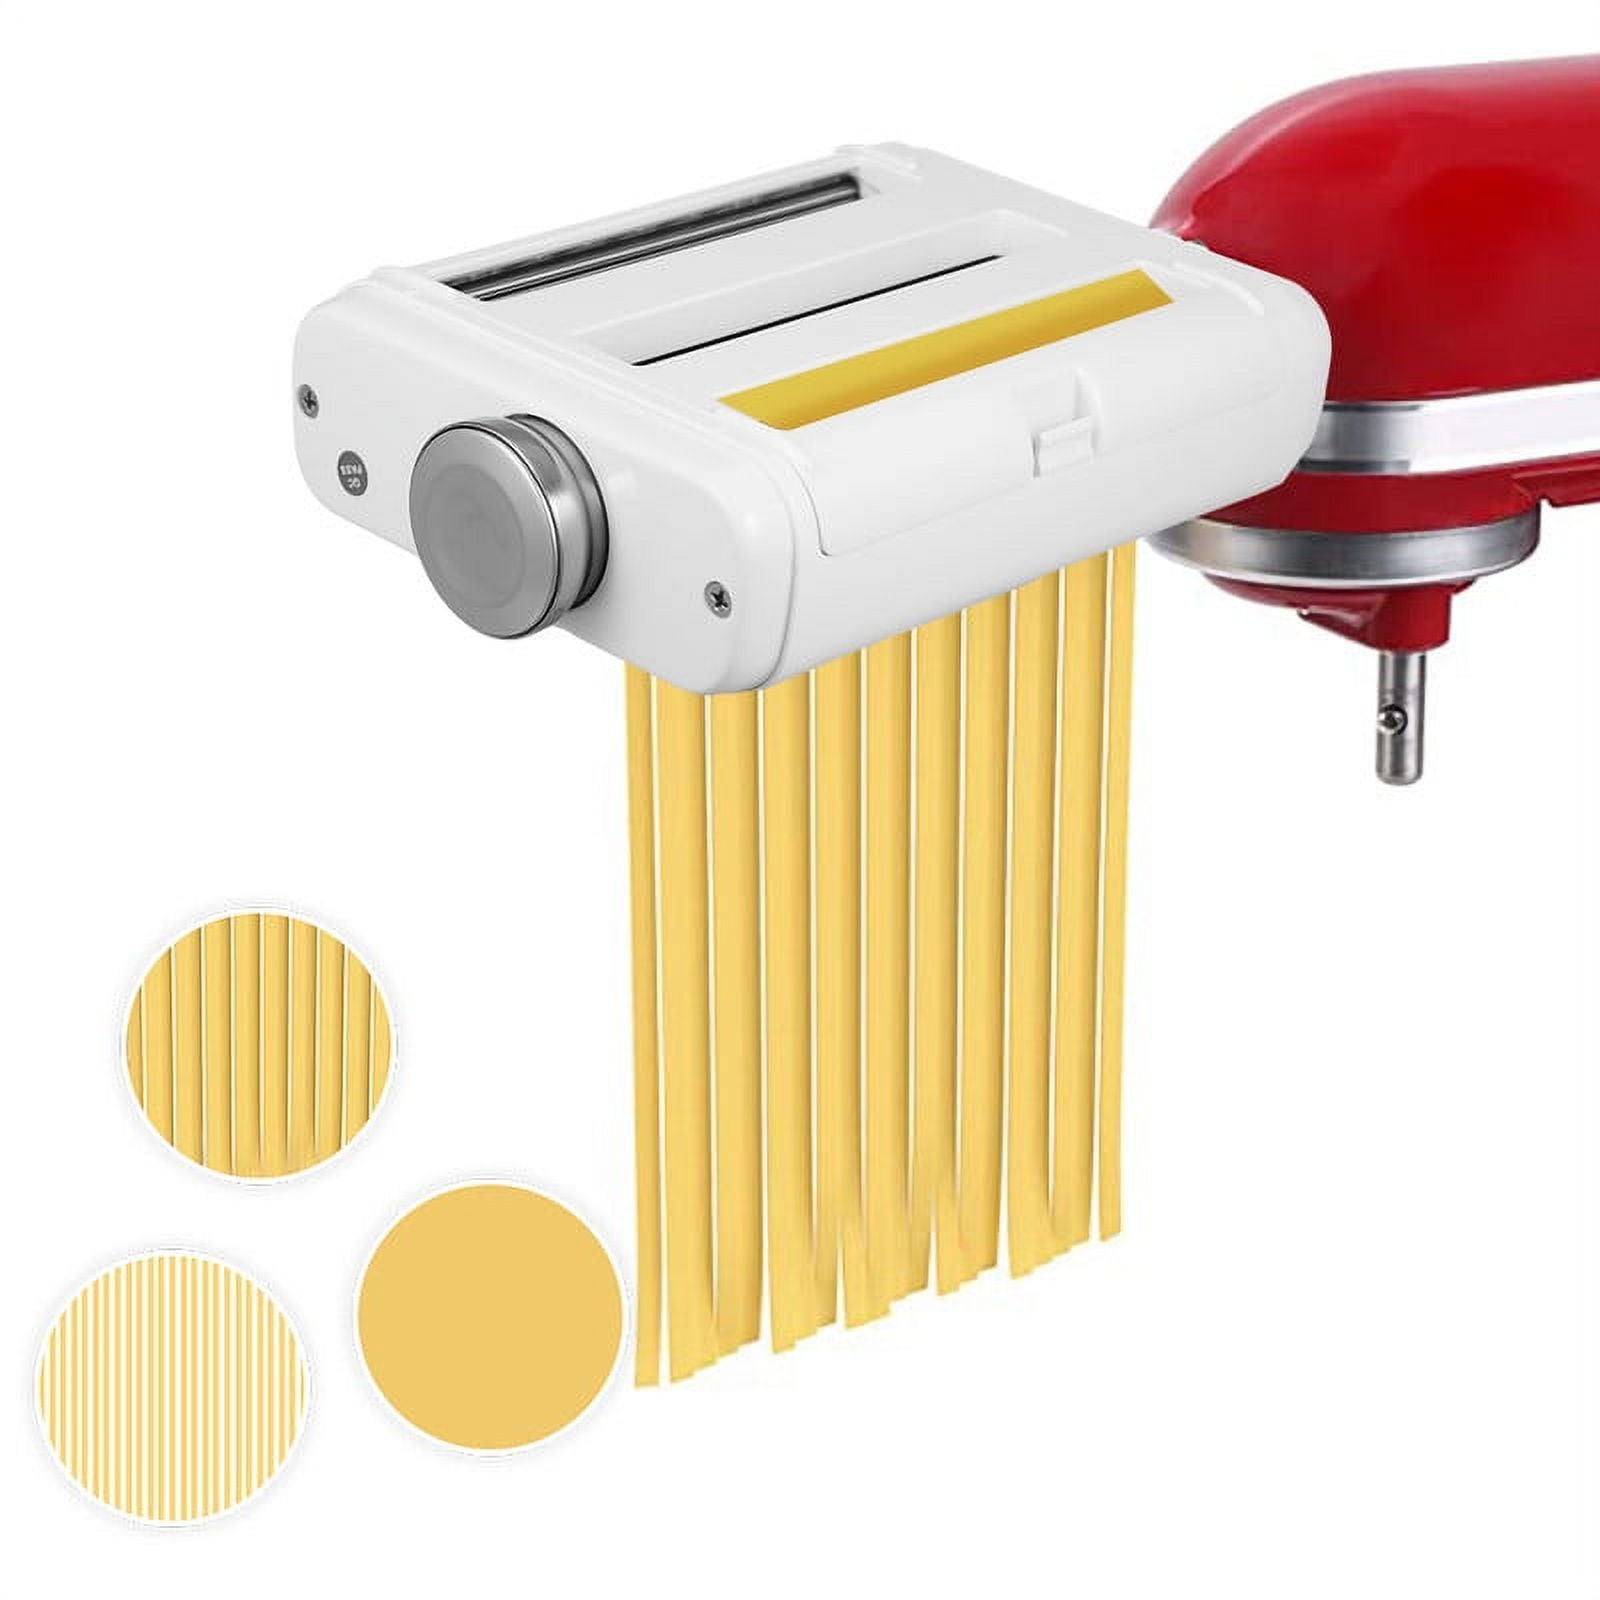 Pasta maker Attachment for KitchenAid Stand Mixers, Included Pasta Sheet  Roller, Spaghetti Cutter and Fettuccine Cutter, 3Ps Pasta Maker with